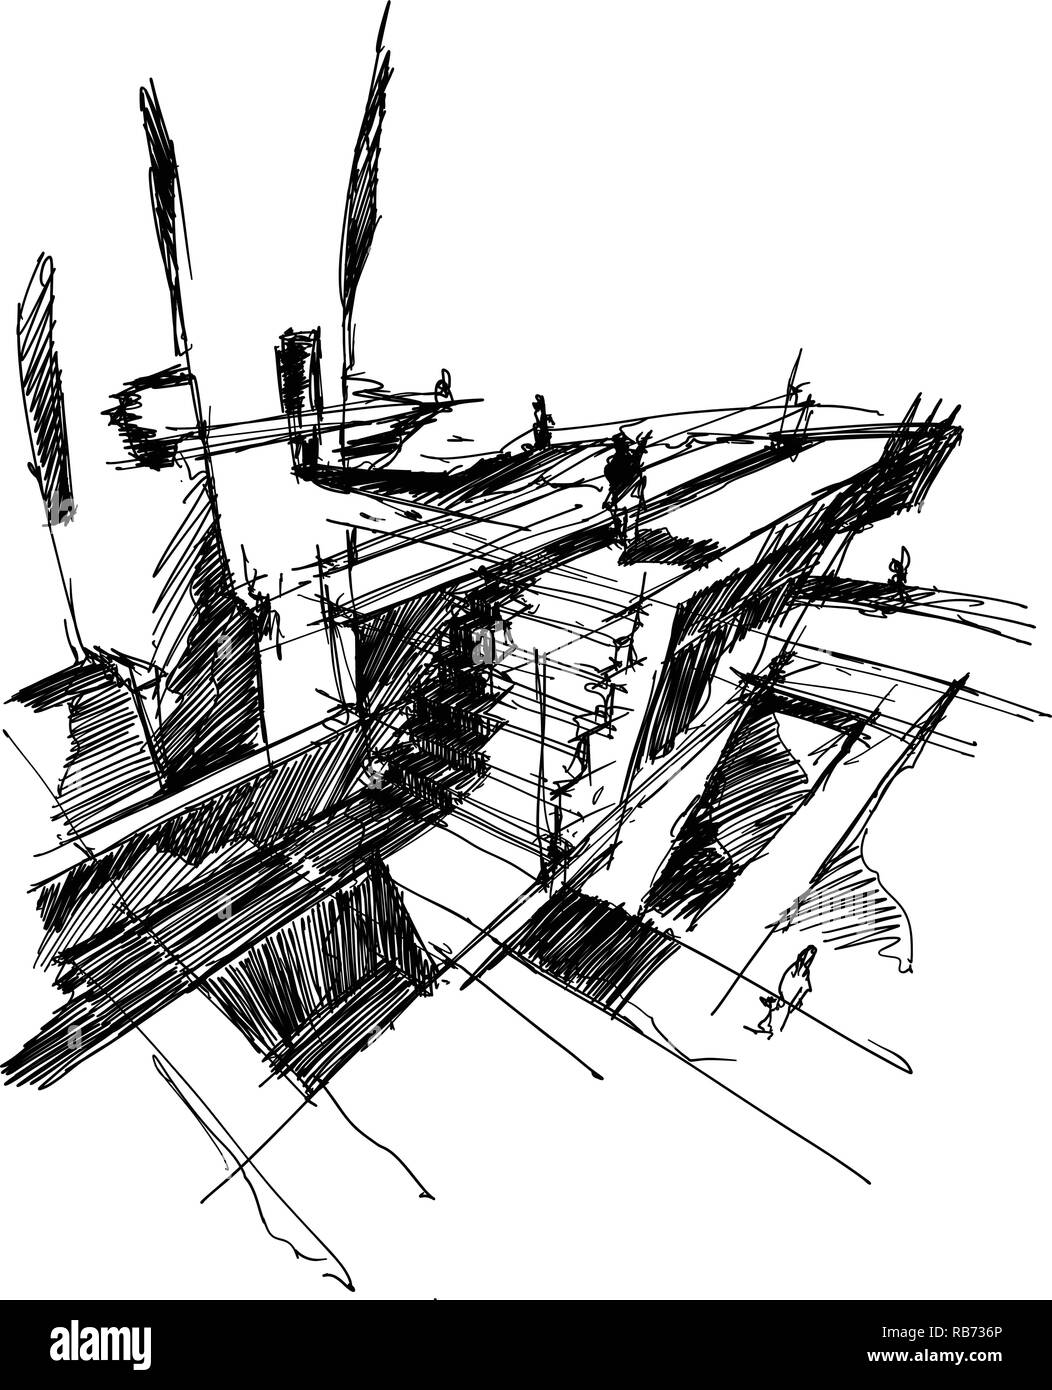 Architectural Abstract Drawing Stock Photos & Architectural Abstract